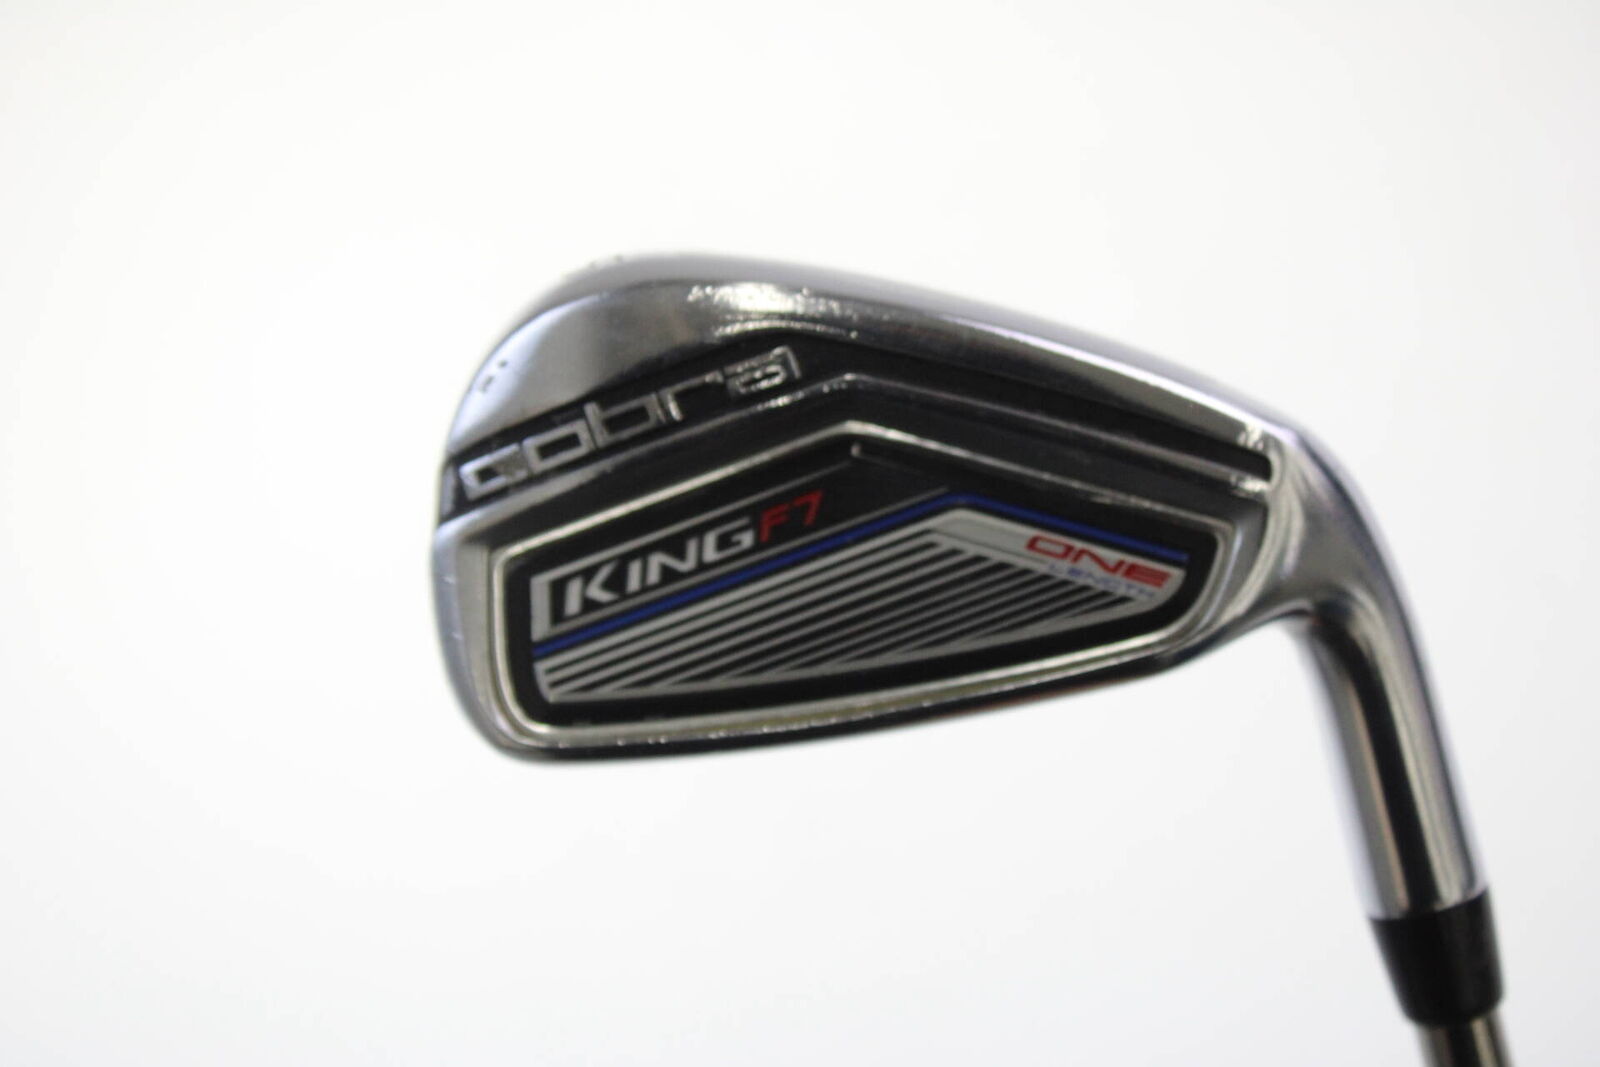 Cobra King F7 One Length Iron Set 4-PW and GW Regular Right-Handed #7759